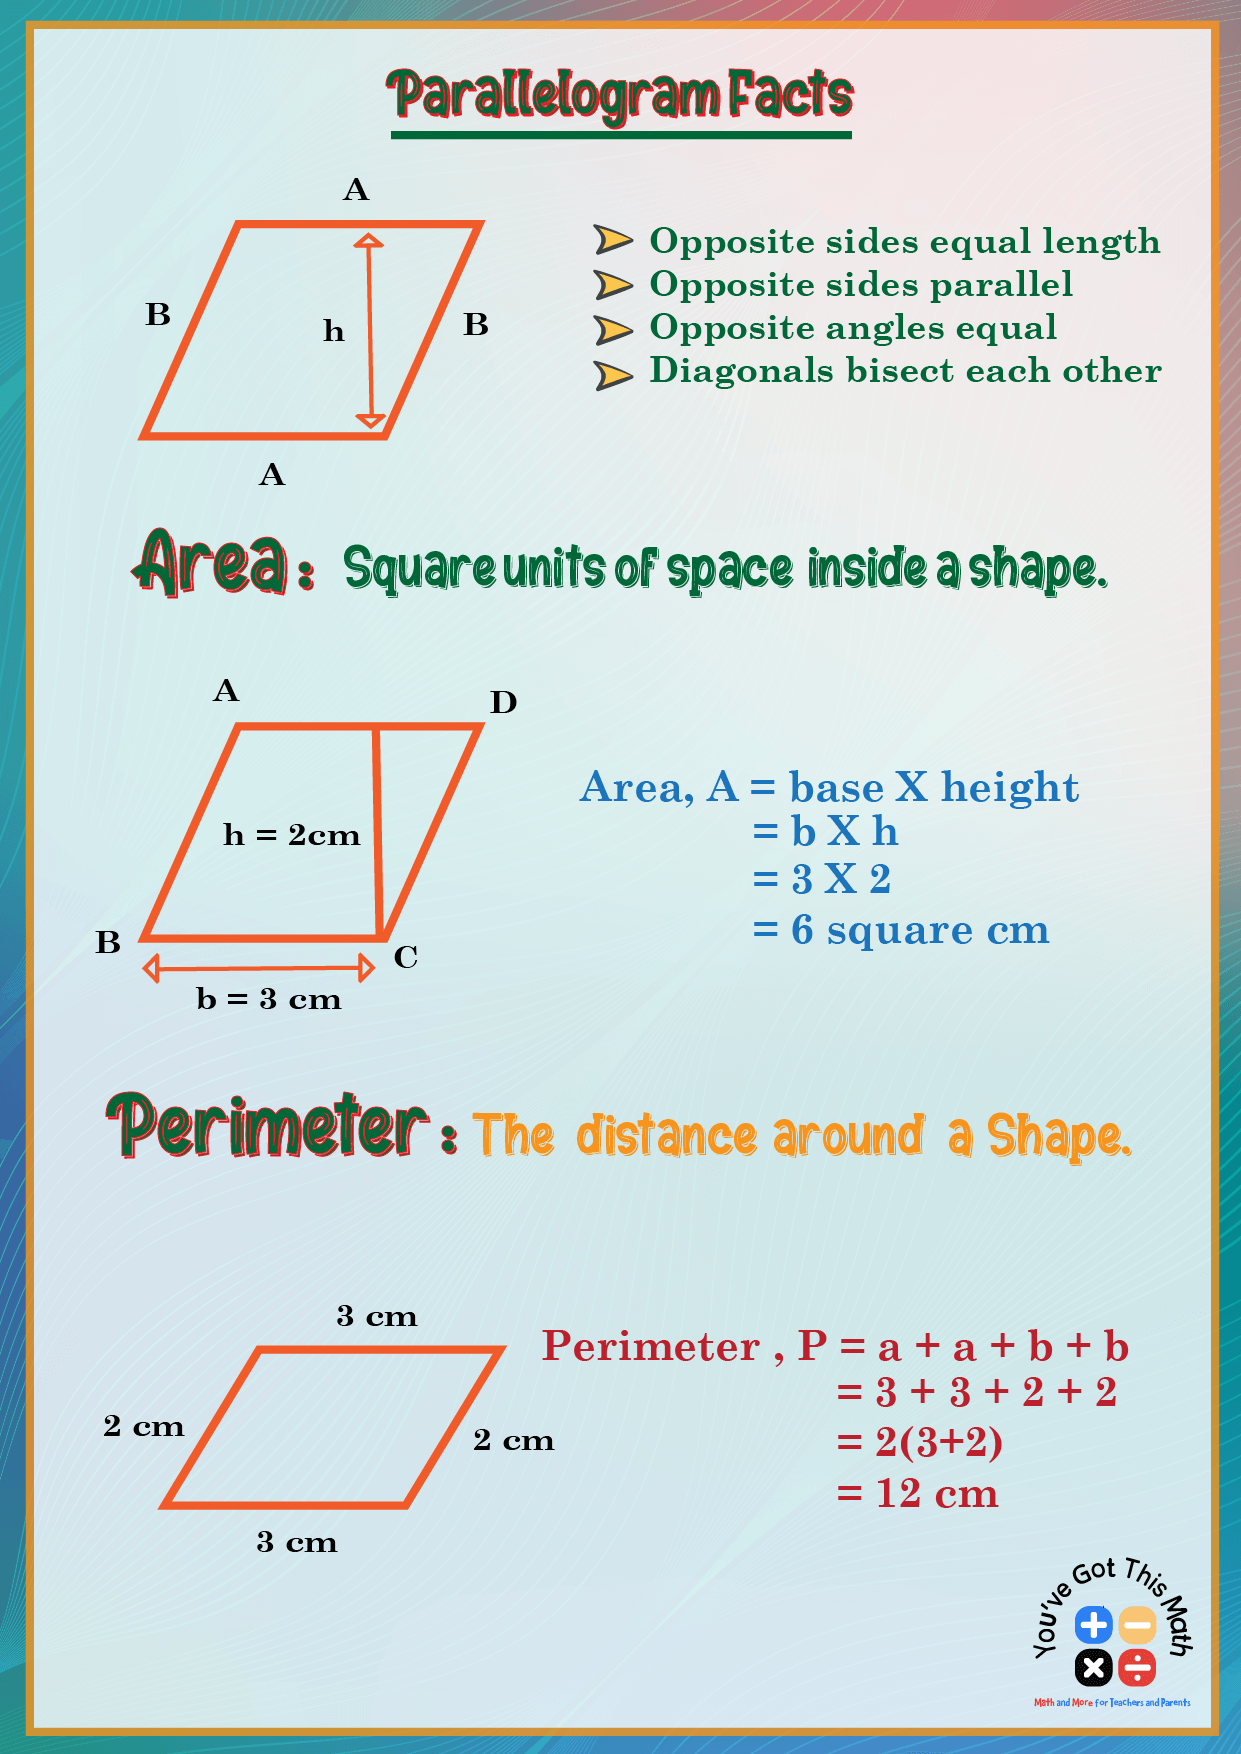 Explaining How to Find Area and Perimeter of Parallelogram